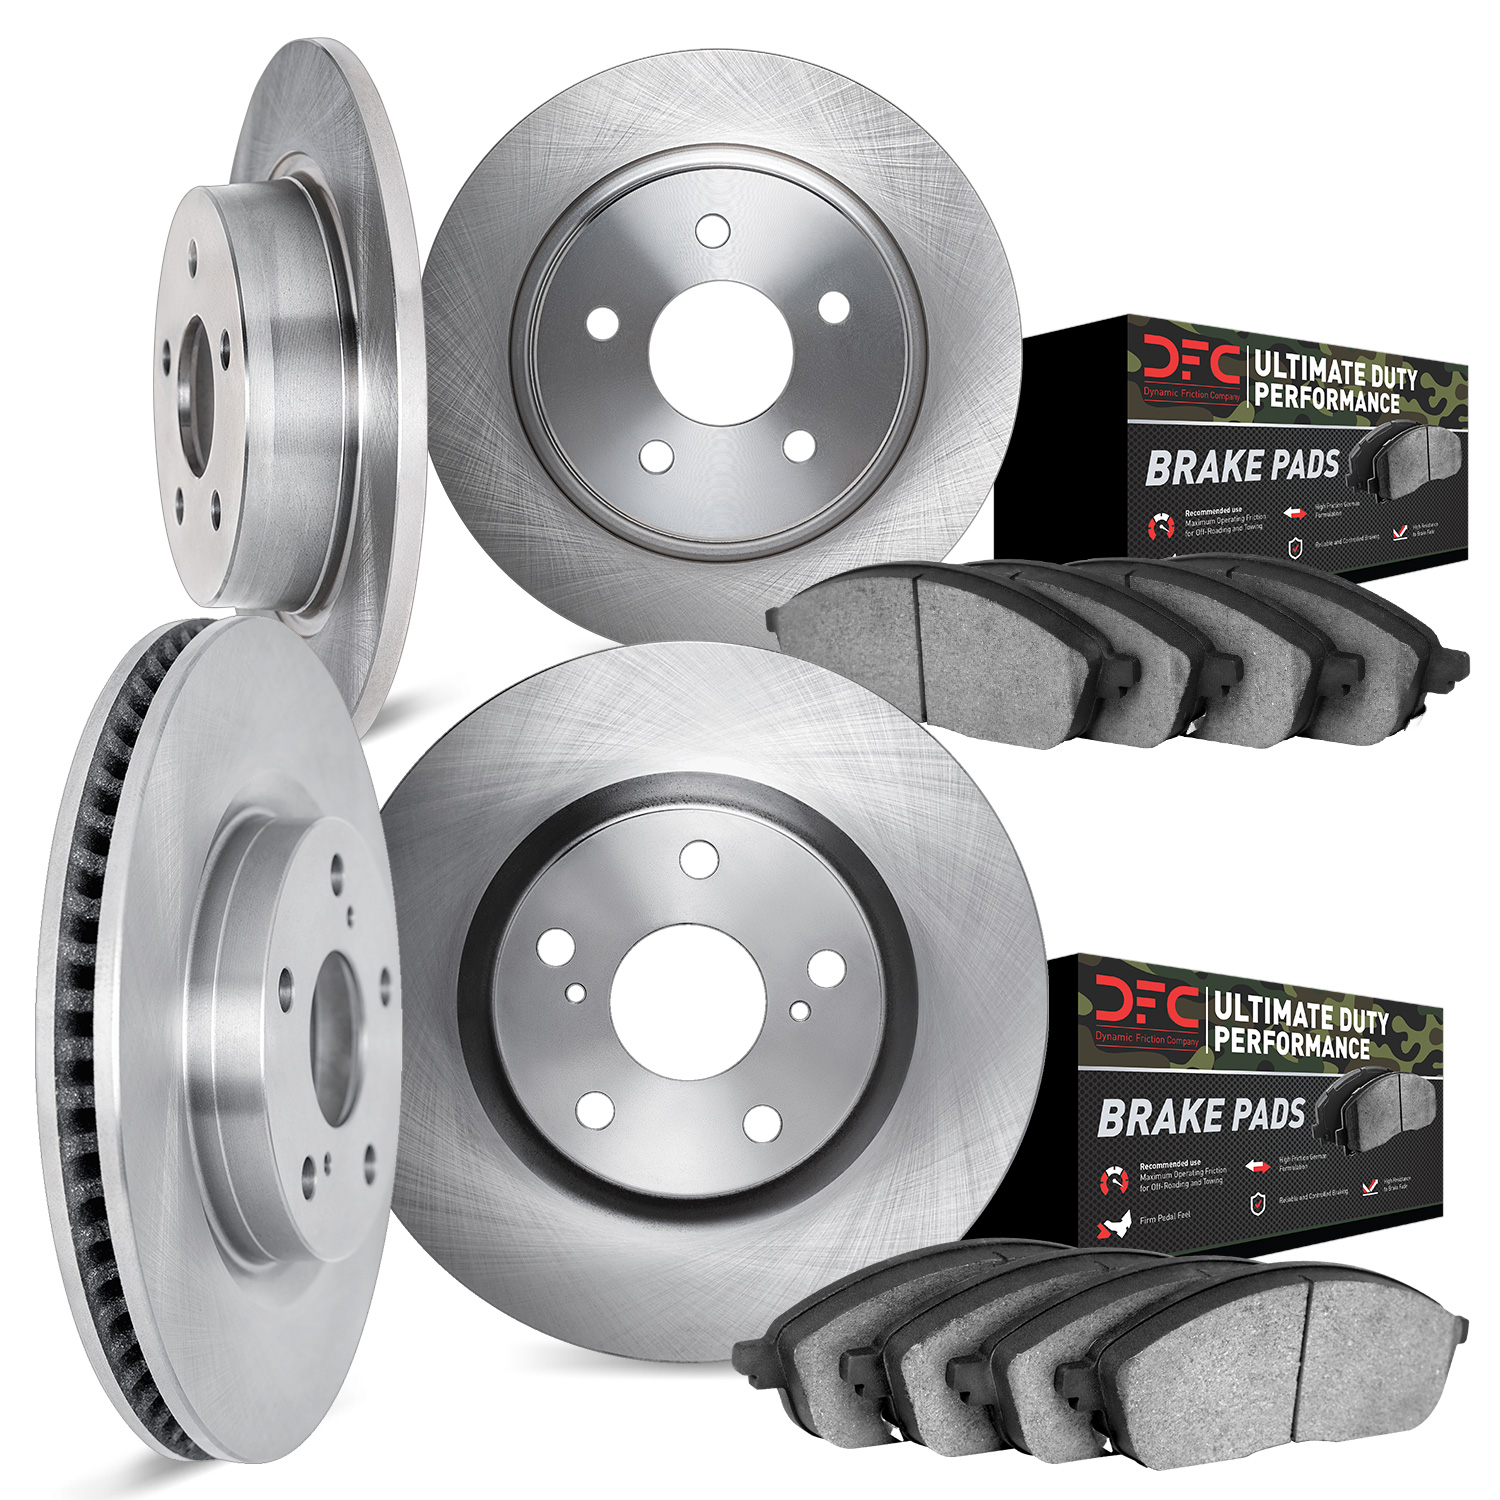 6404-42044 Brake Rotors with Ultimate-Duty Brake Pads, 2003-2006 Mopar, Position: Front and Rear